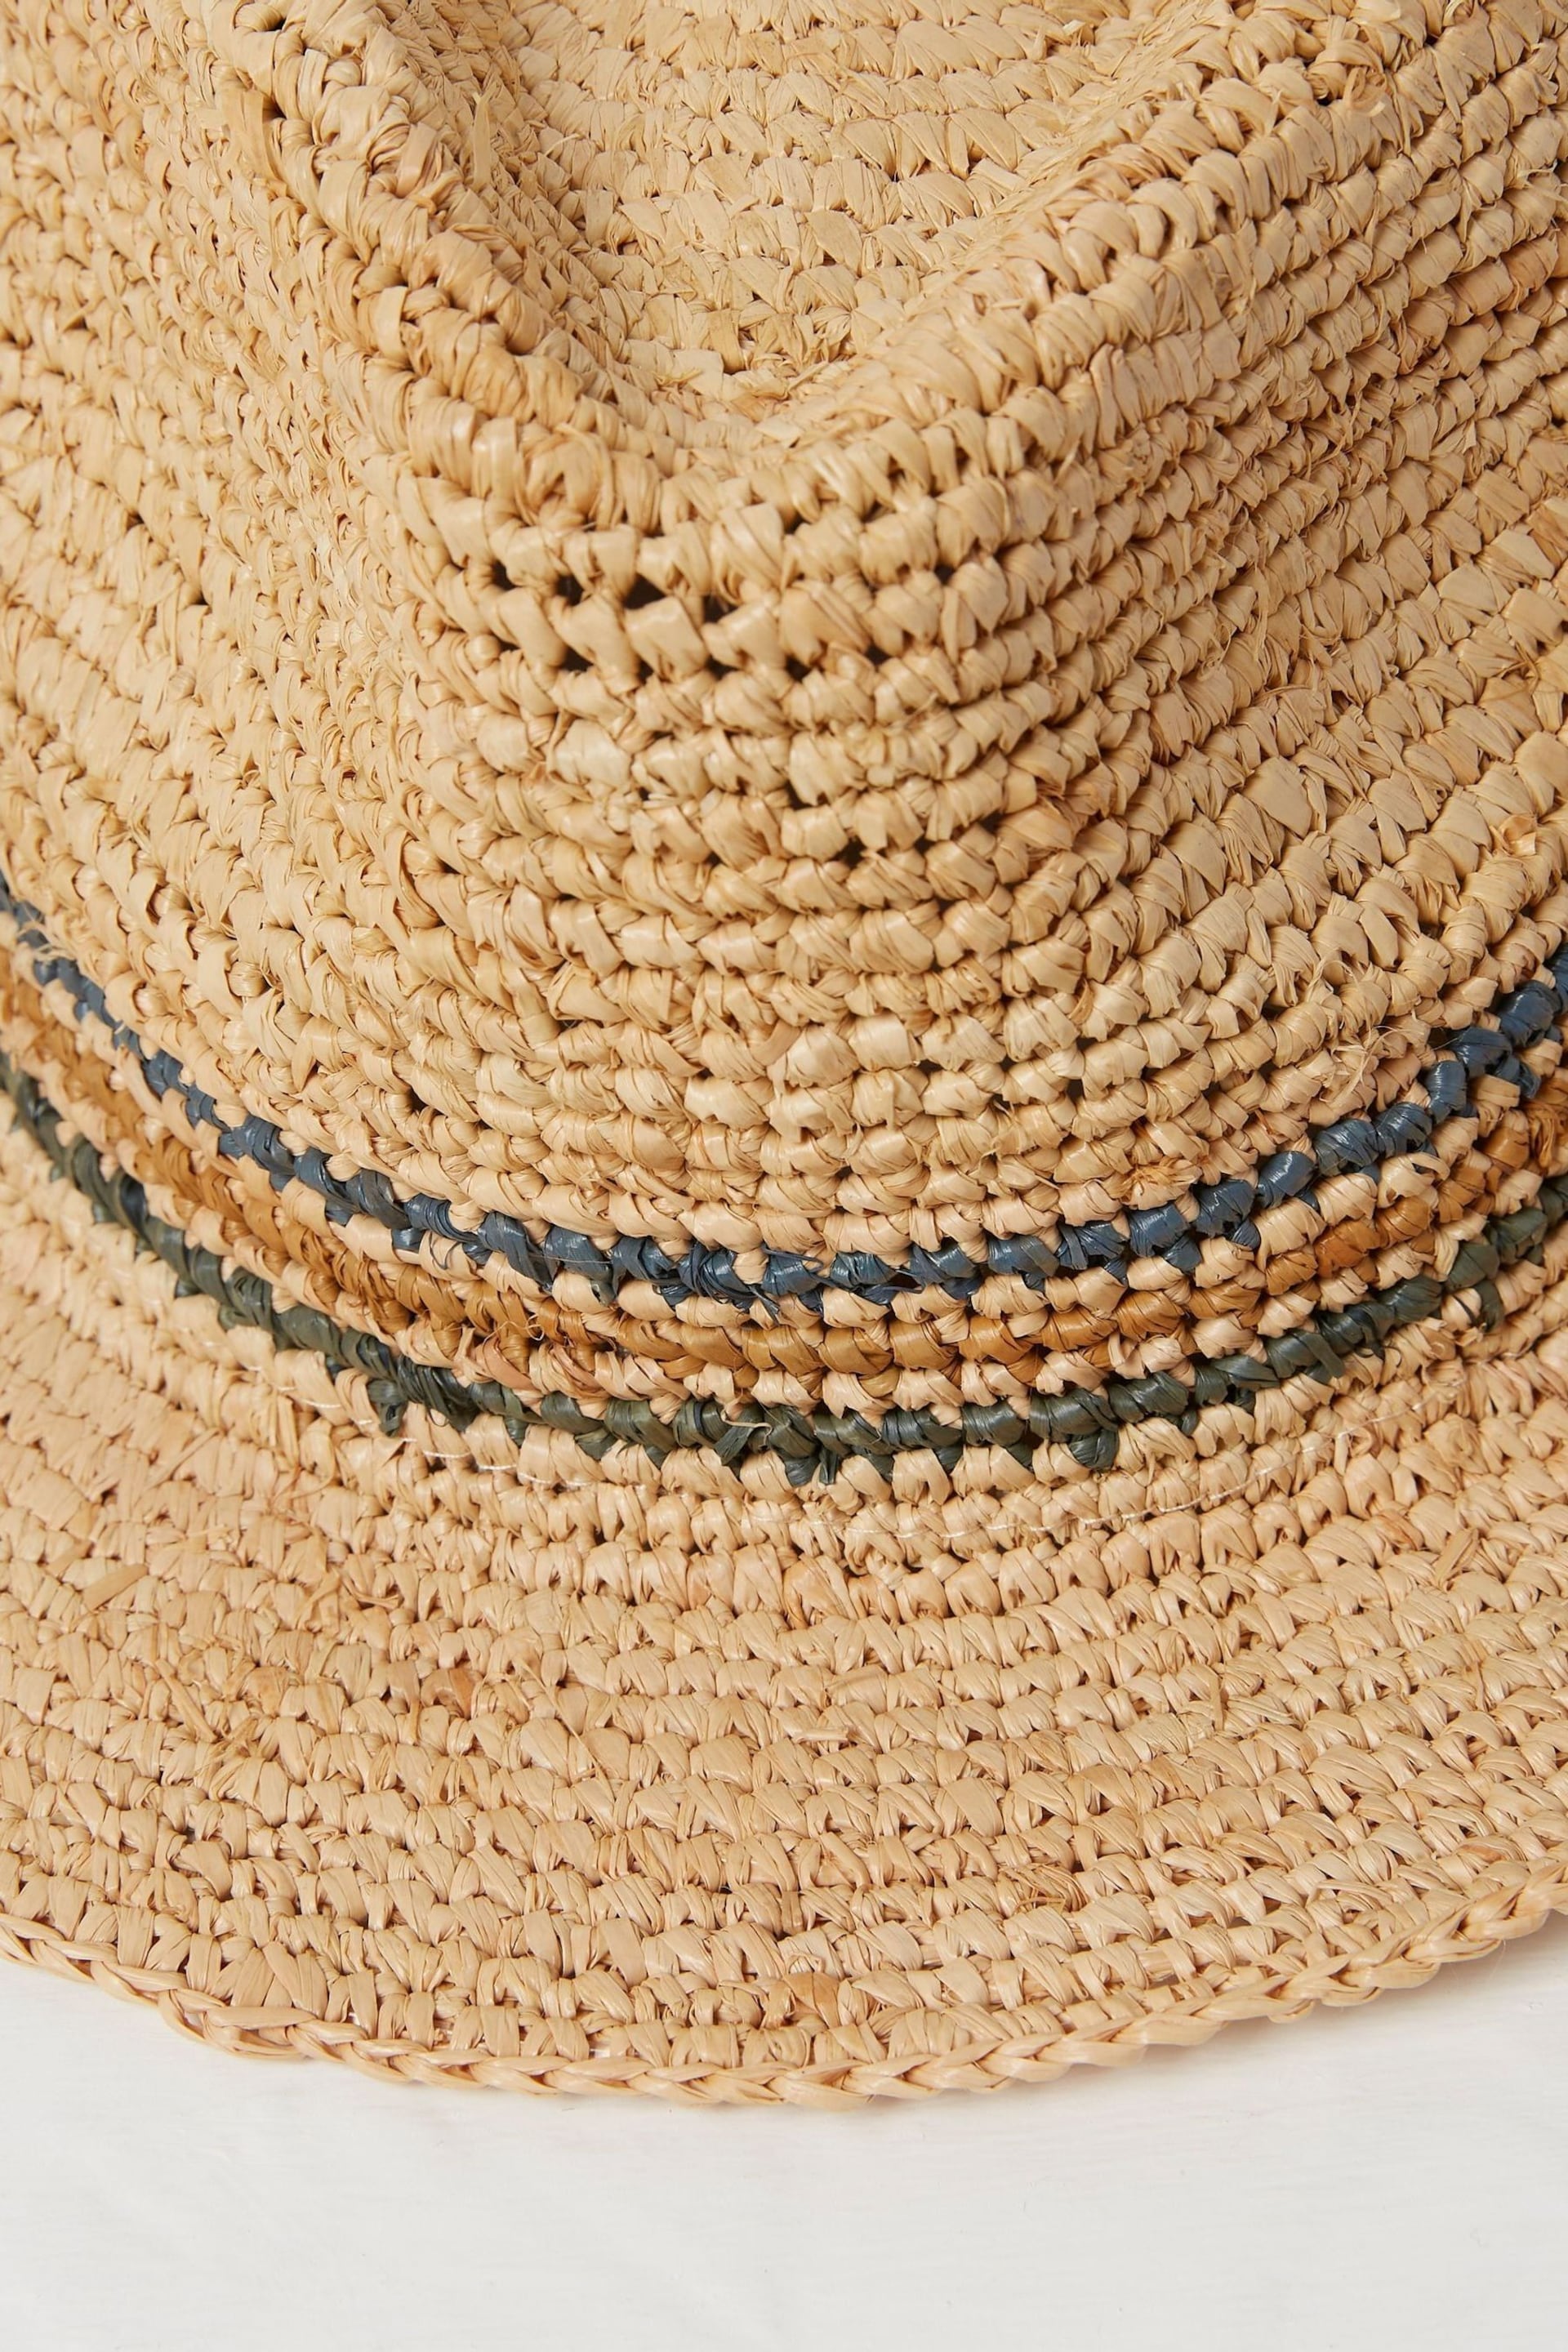 FatFace Natural Stripe Trilby Hat - Image 2 of 2